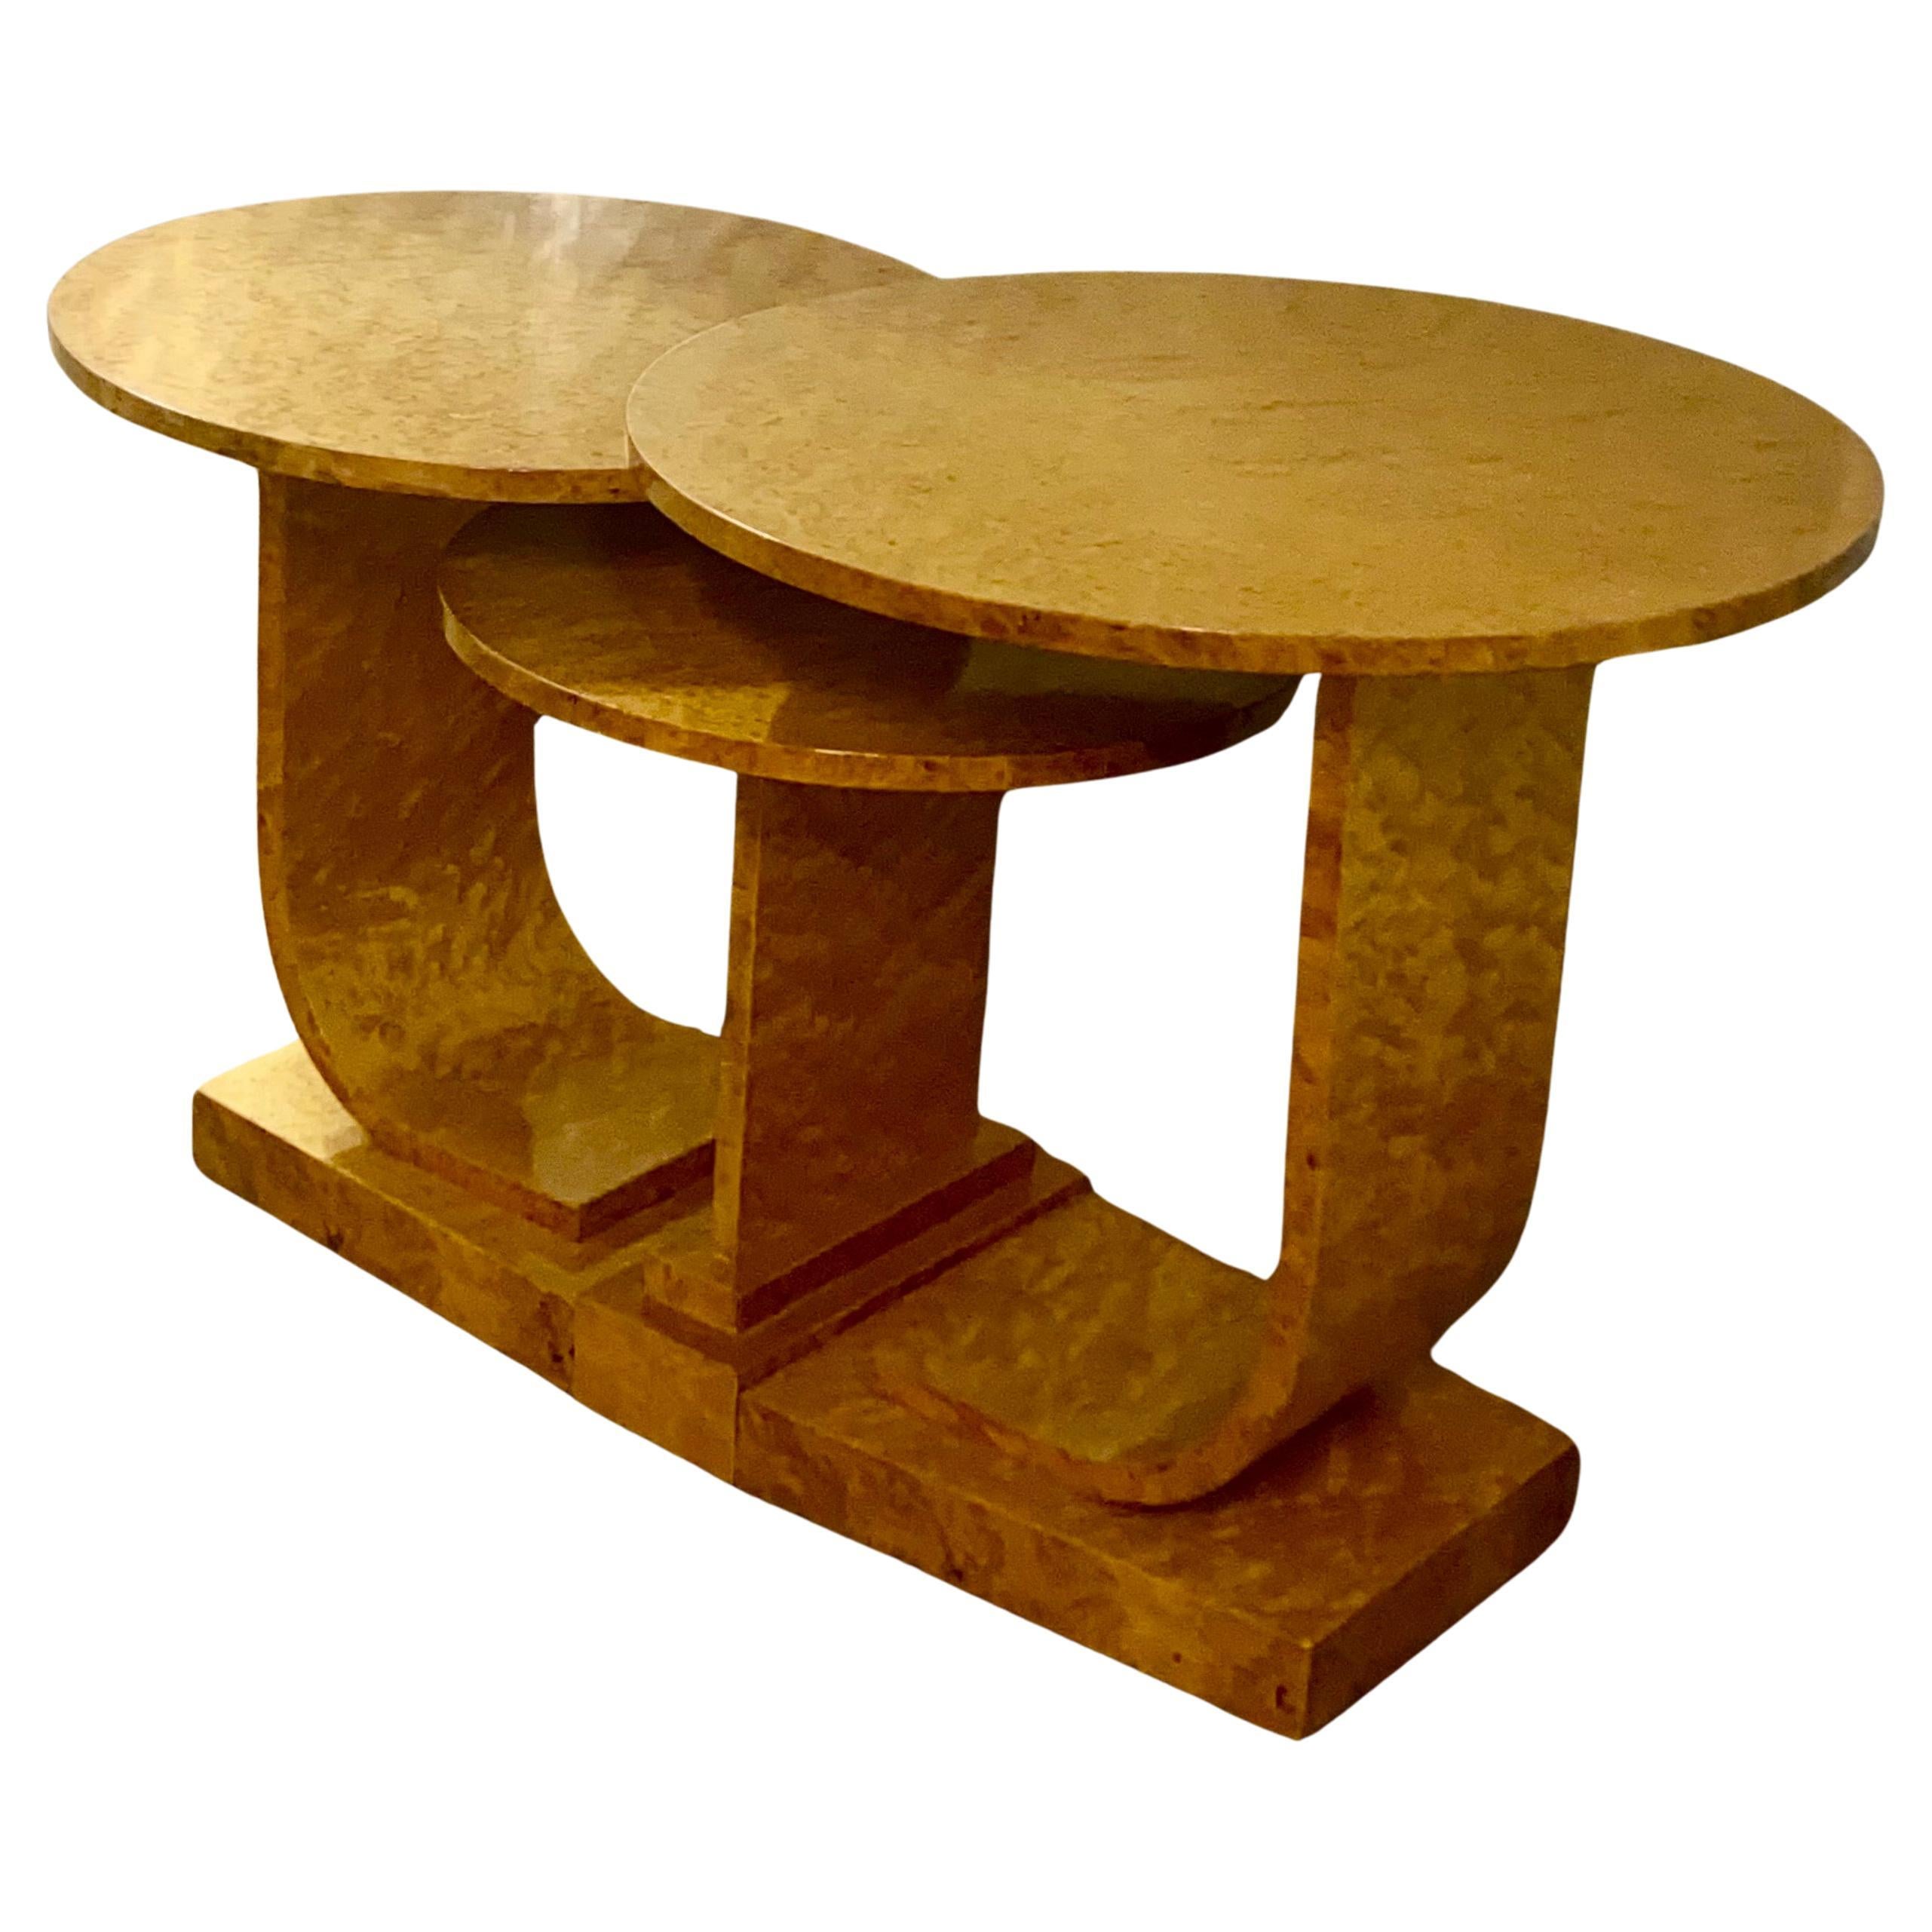 A Rare Art Deco Blonde Birds Eye Maple J Nest of Tables by Epstein Circa 1930 For Sale 8